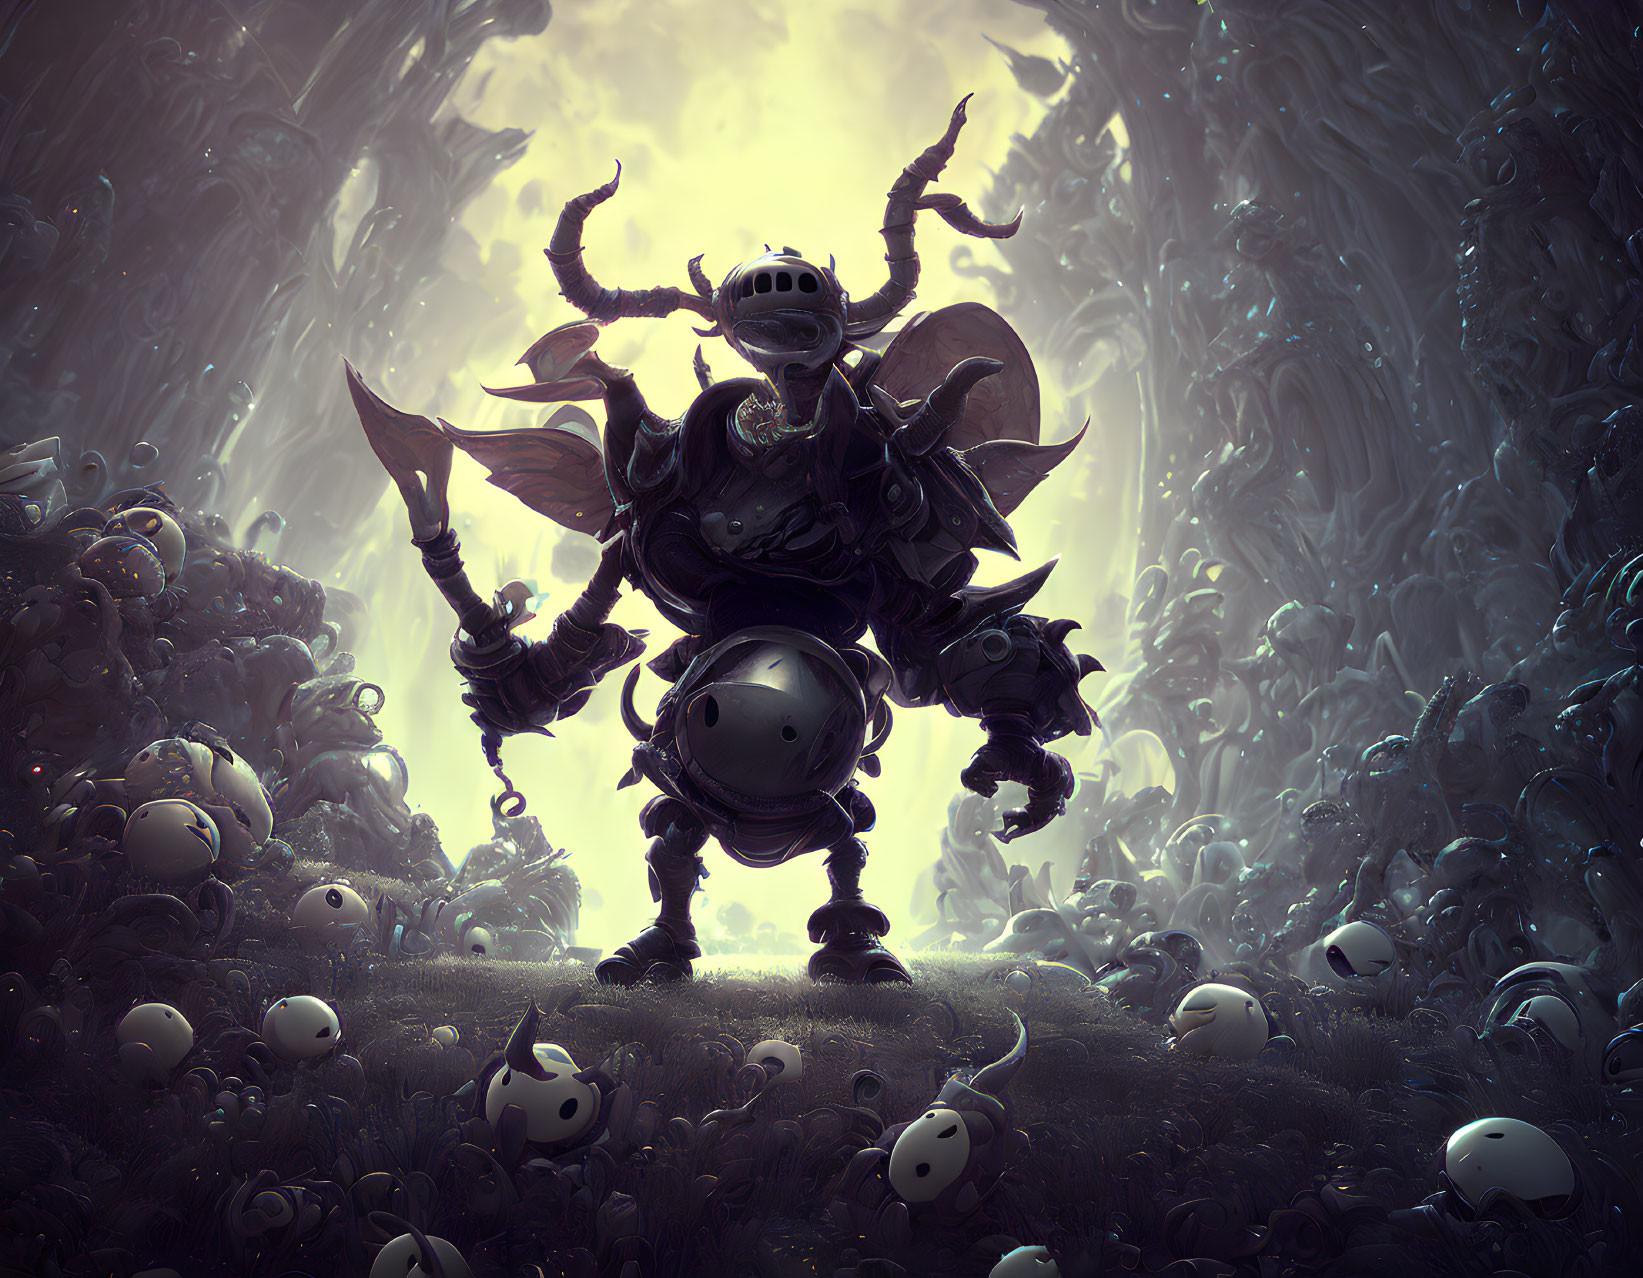 Armored knight with insect-like features in moody environment.